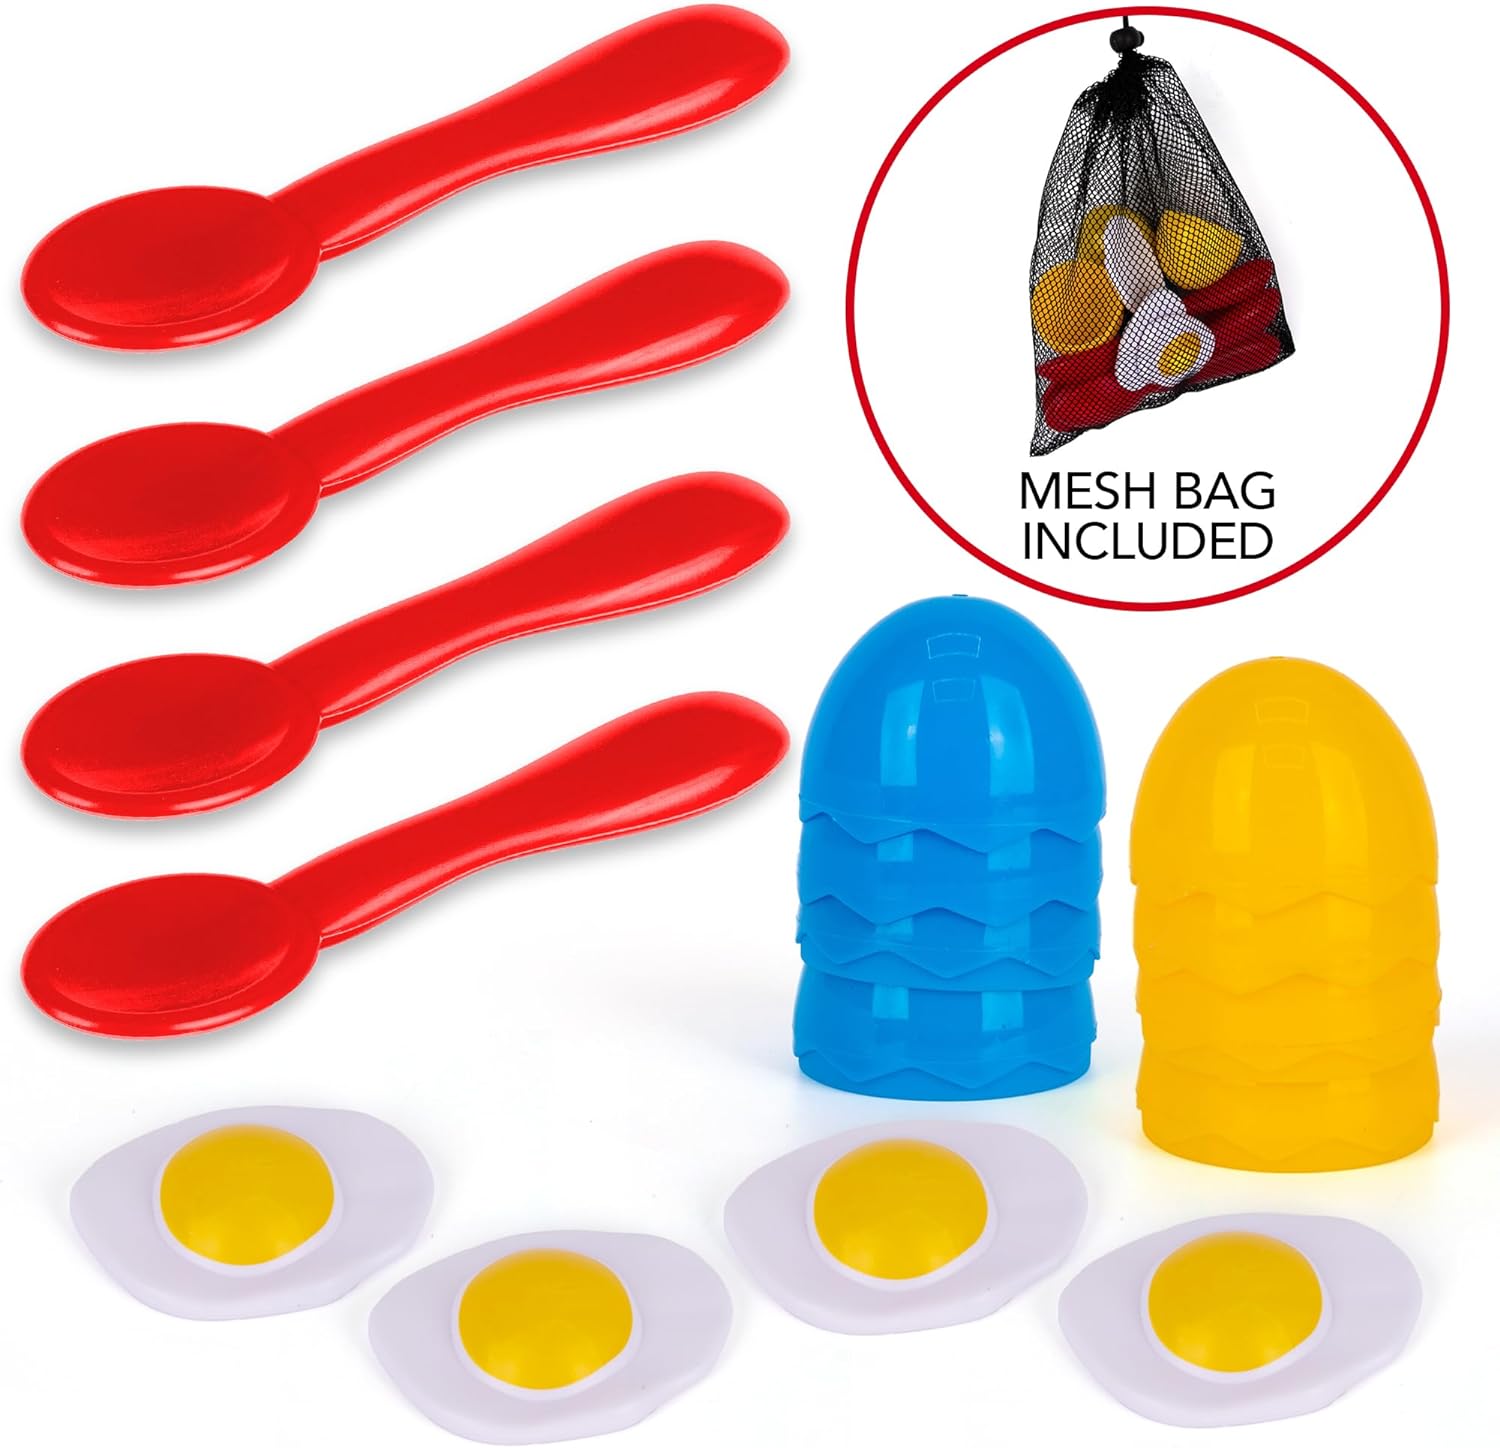 Egg Spoon Race Set - Includes 4 Spoons, 4 Eggshells That Open, and 4 Pretend Yolks